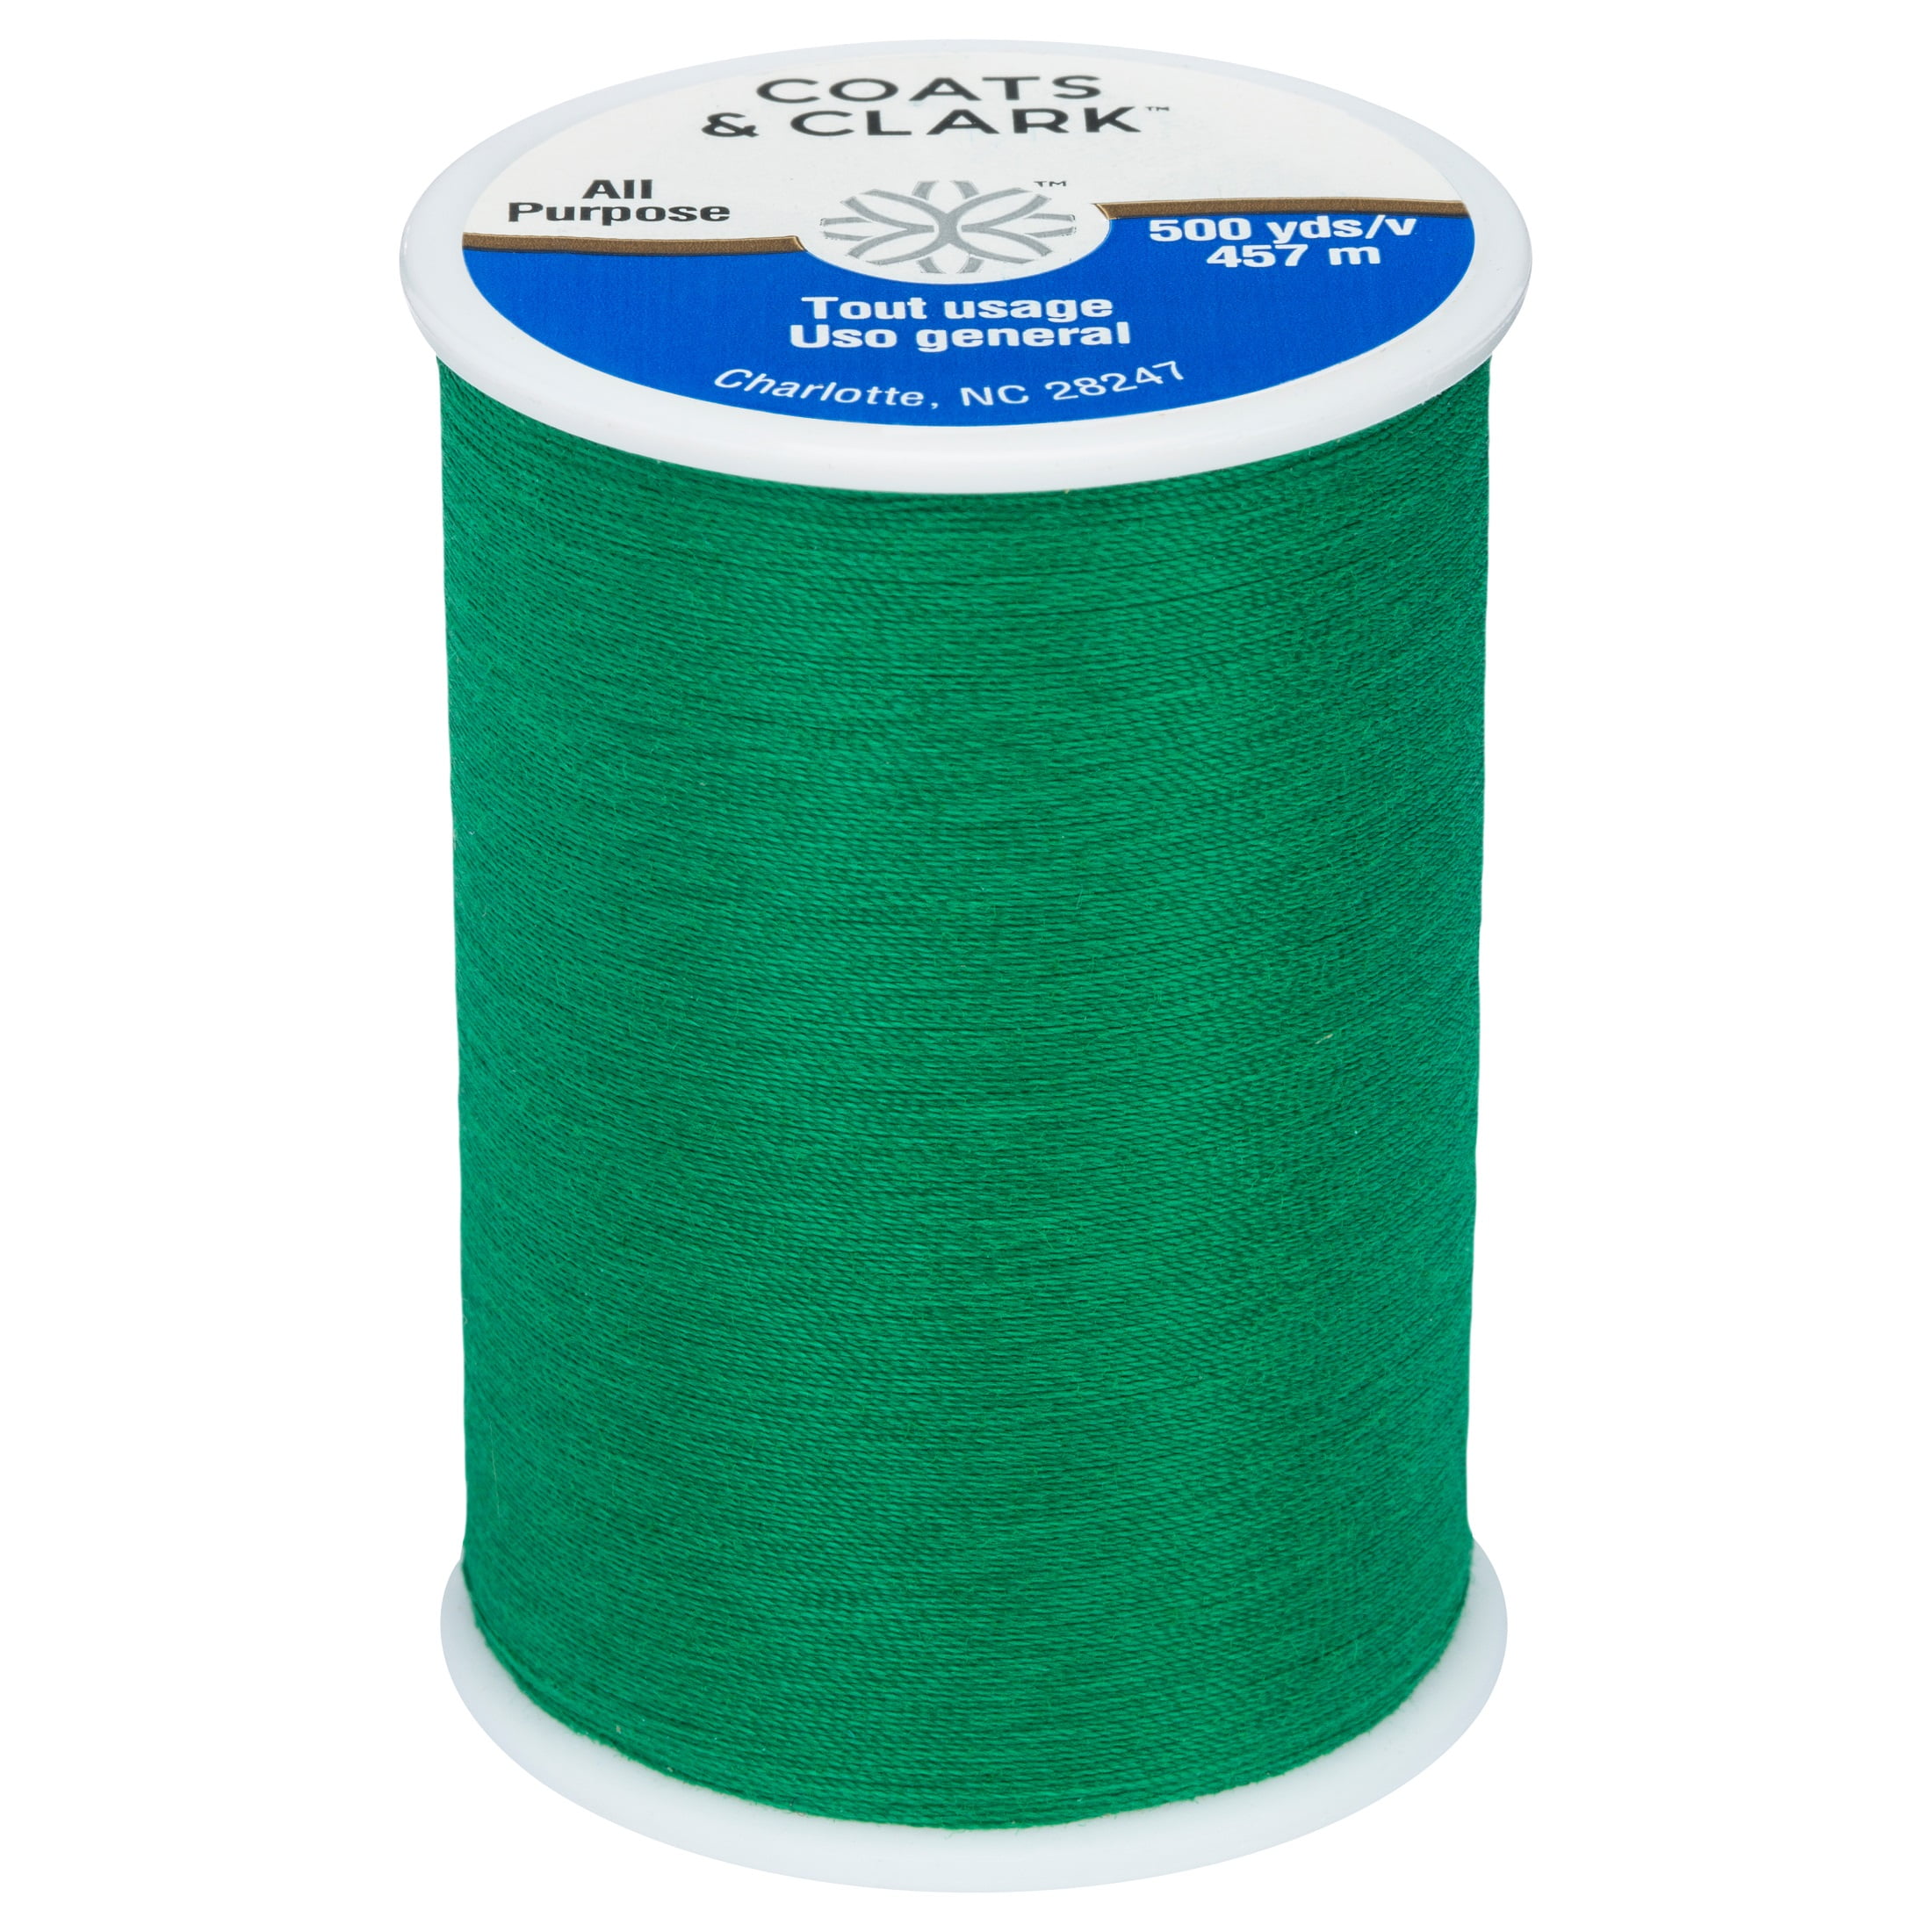 Coats & Clark All Purpose Kelly Green Polyester Thread, 500 yards/457 meters